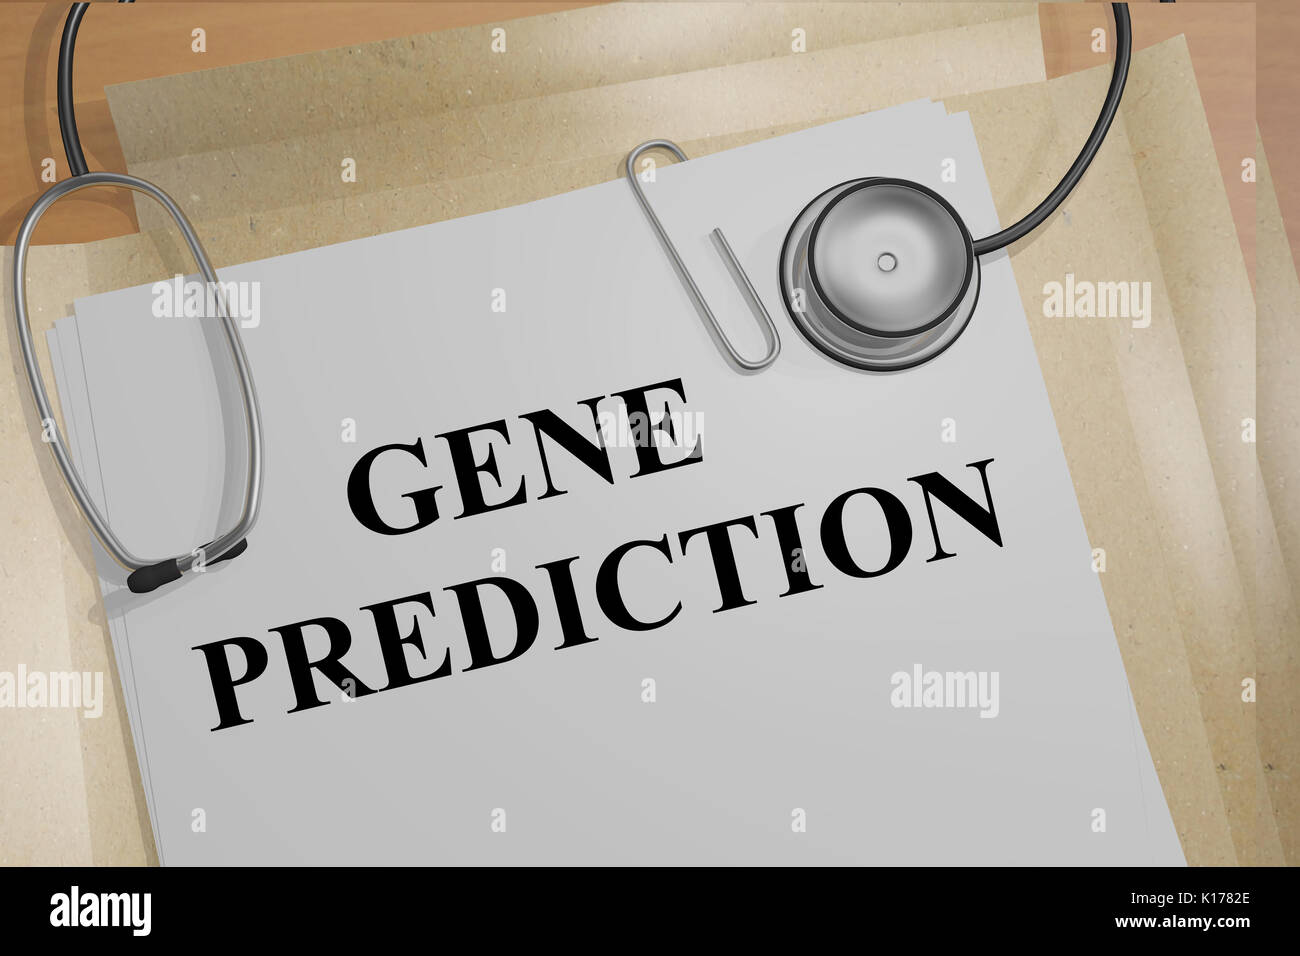 3D illustration of 'GENE PREDICTION' title on medical documents. Medical research concept. Stock Photo